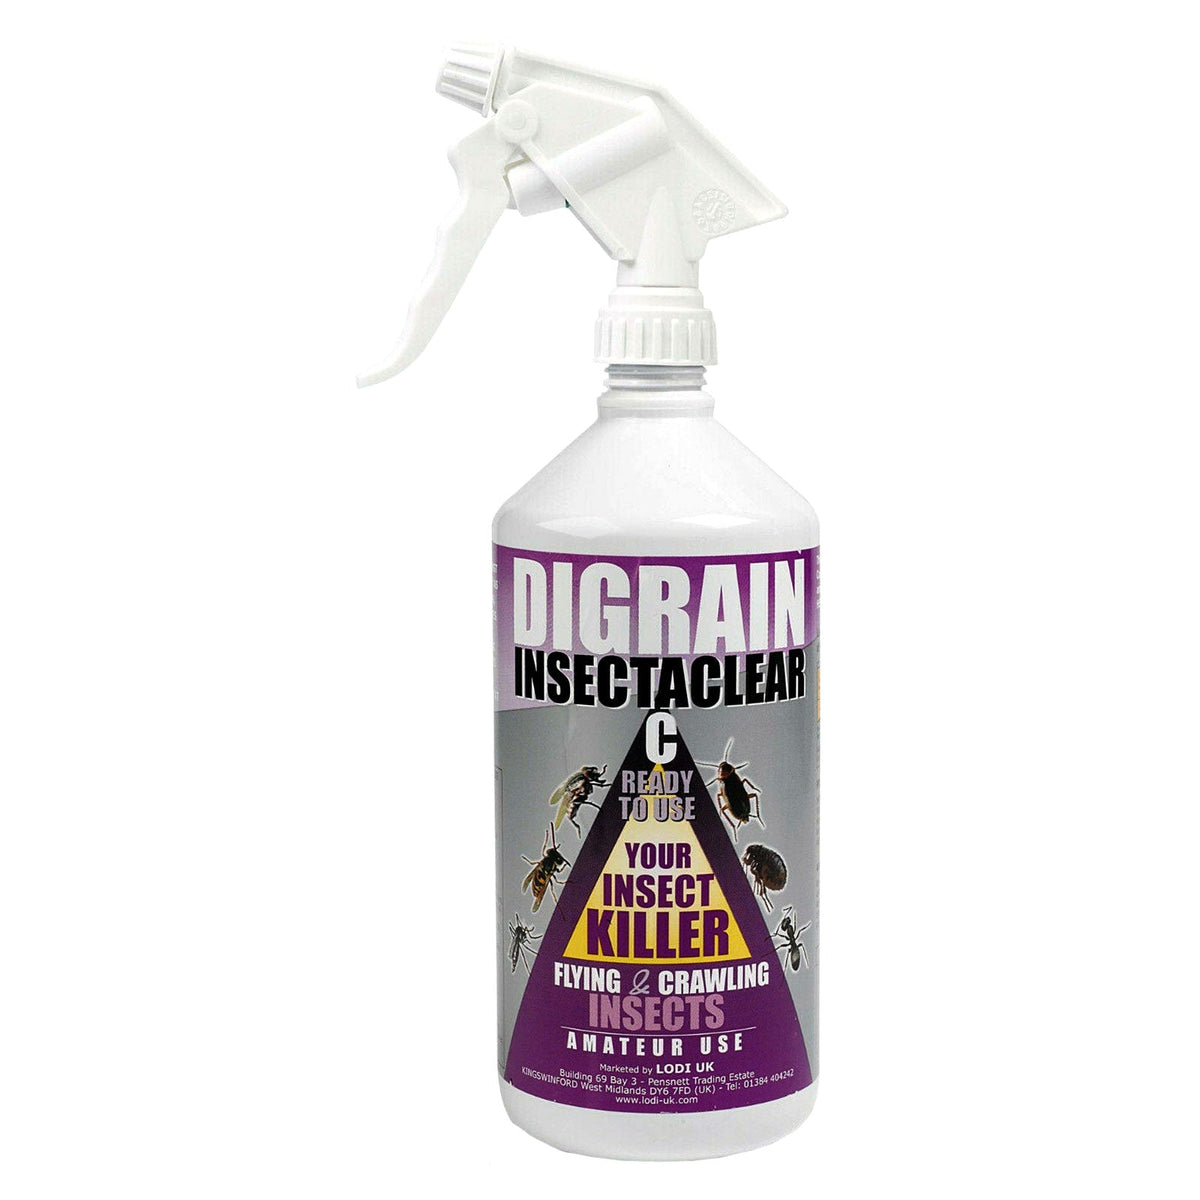 Digrain Insectaclear C+ Moths, Ants, Bedbugs, Cockroaches, Fleas, Flies, Wasp, Mosquitoes, Spider Killing Spray Ready to use - 1 Litre - Moth Control